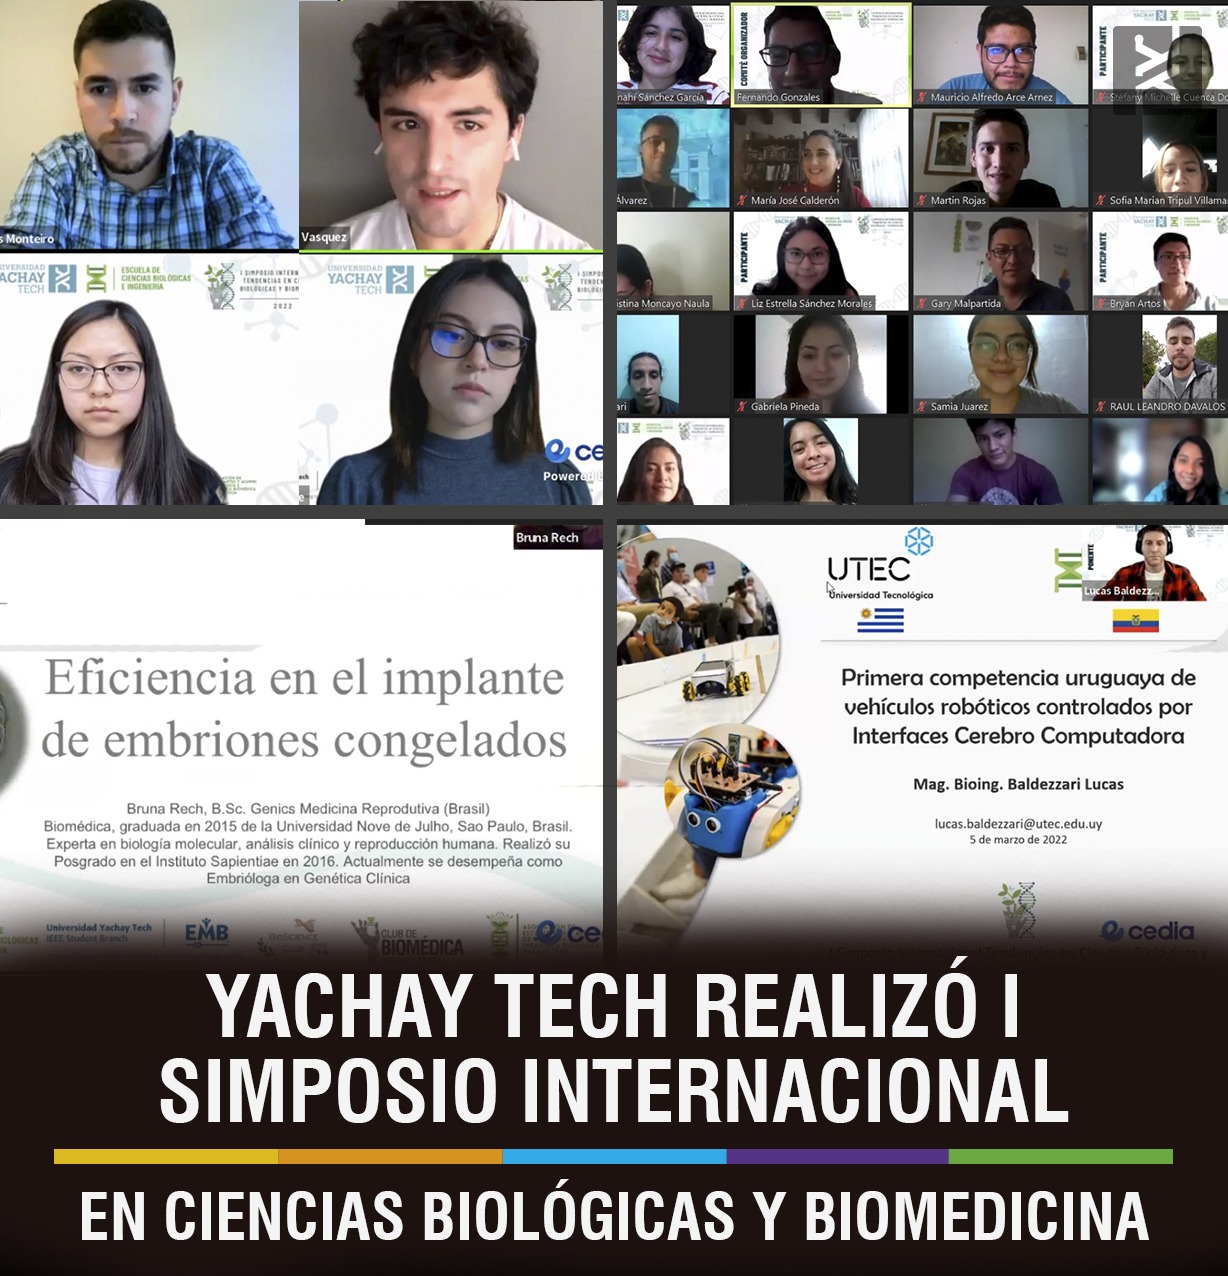 YACHAY TECH HOLDS I INTERNATIONAL SIMPOSIUM ON BIOLOGICAL SCIENCES AND BIOMEDICINE